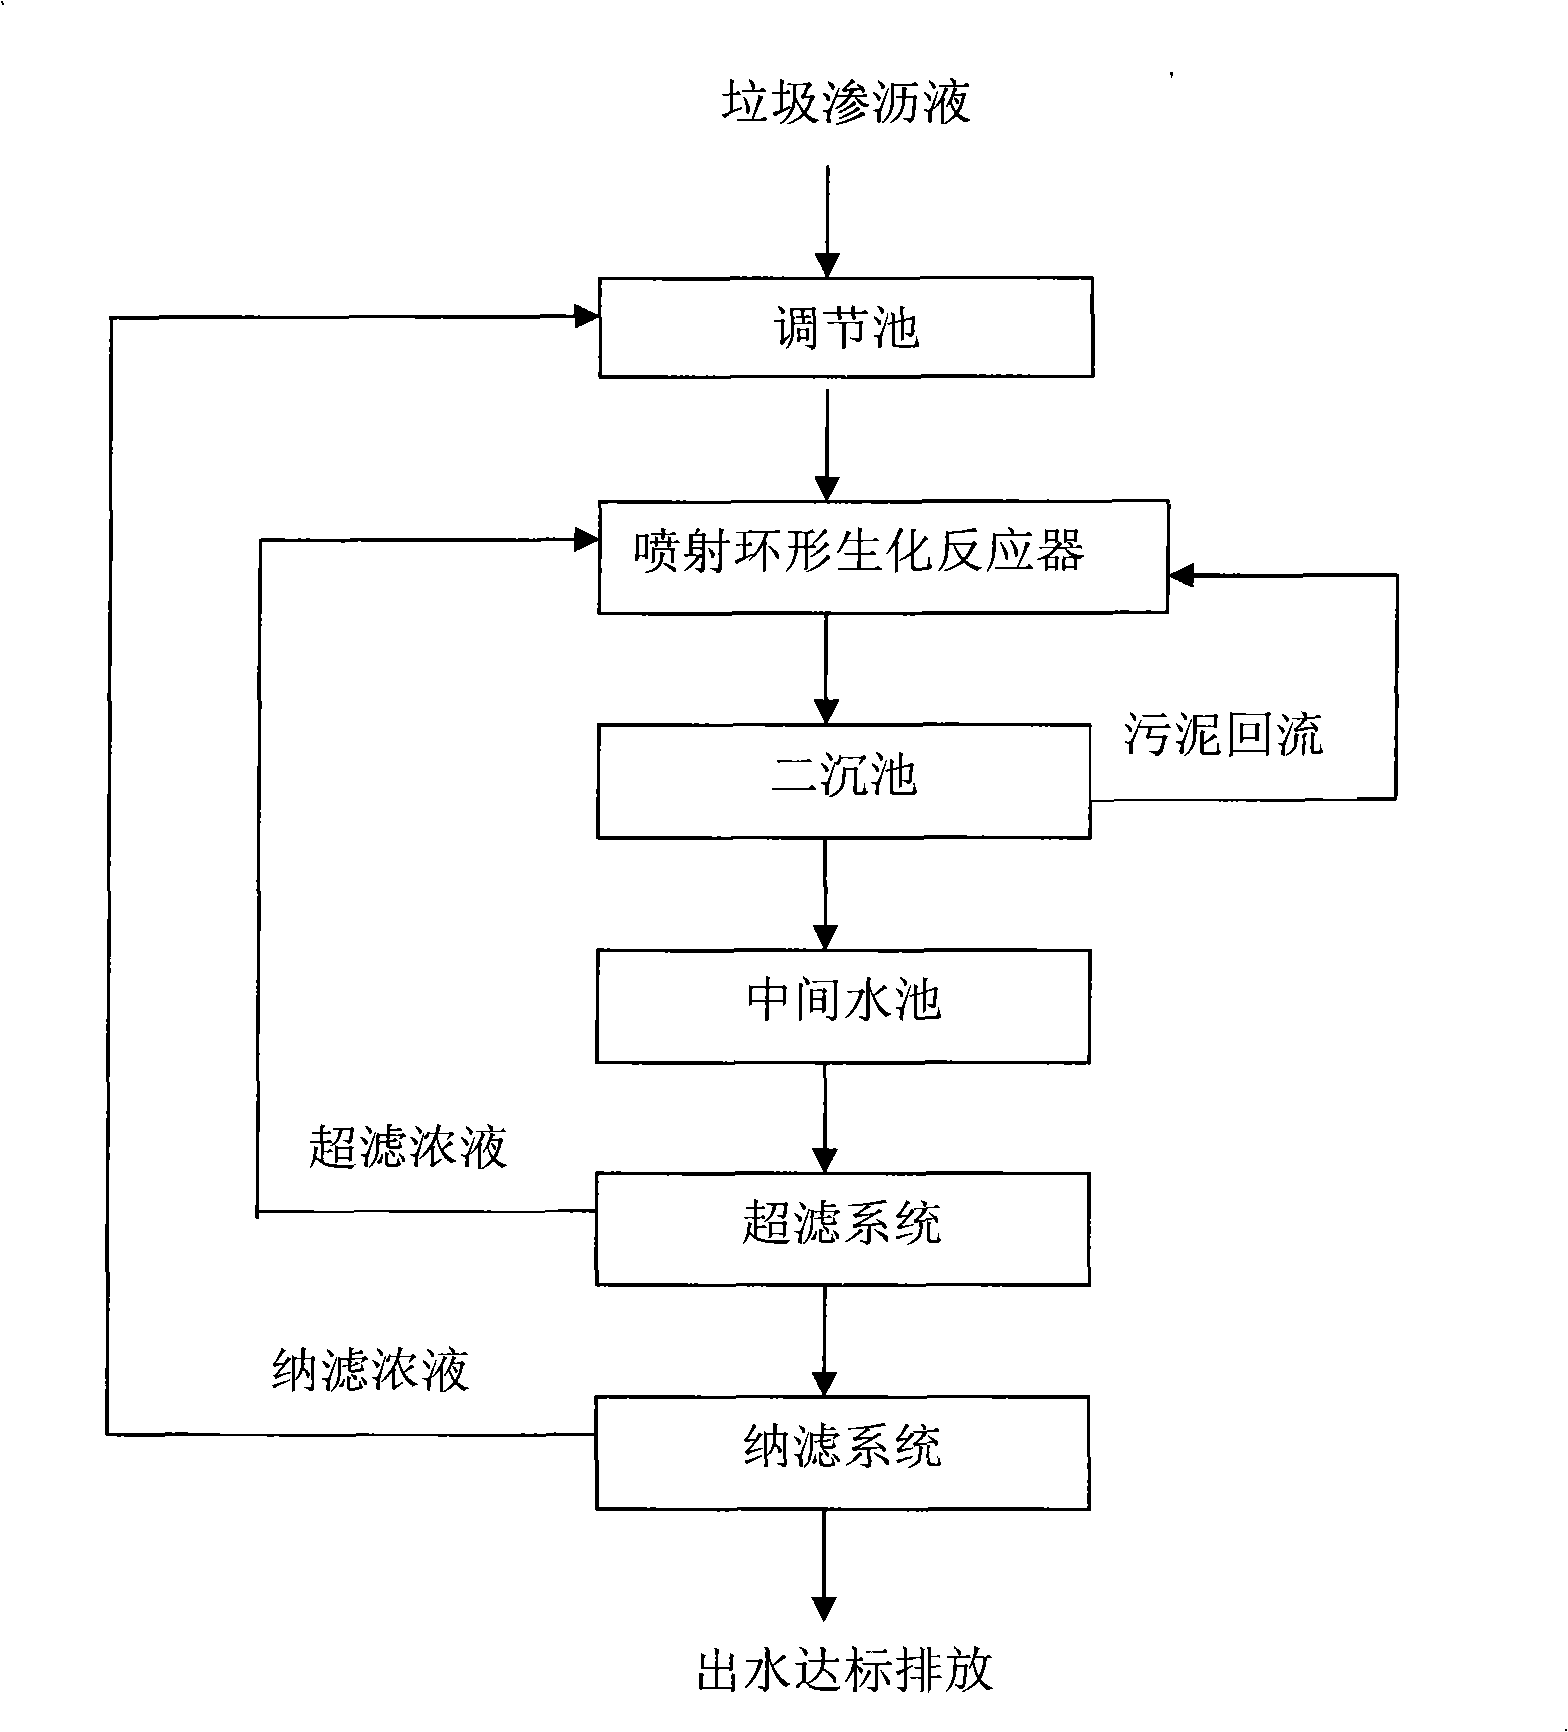 Method of processing high concentration organic wastewater